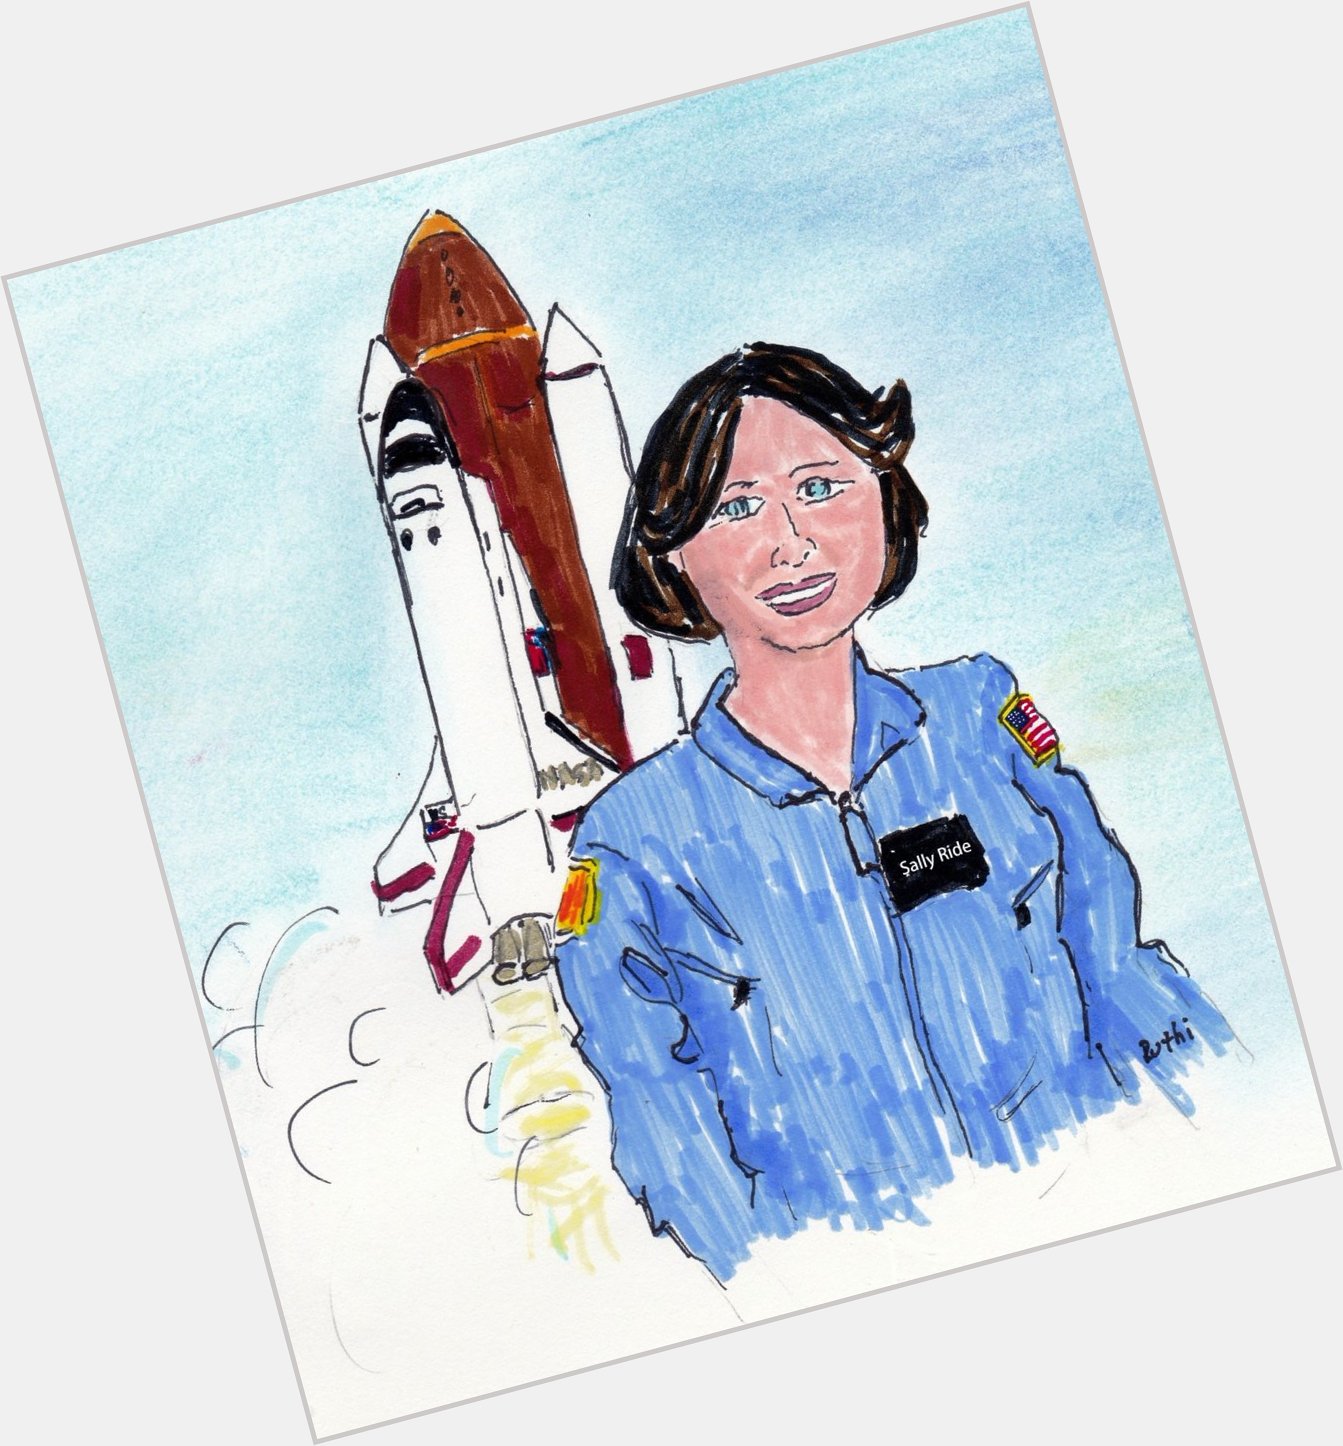 Happy birthday, Sally Ride! Did you know she was the first American woman in space?  